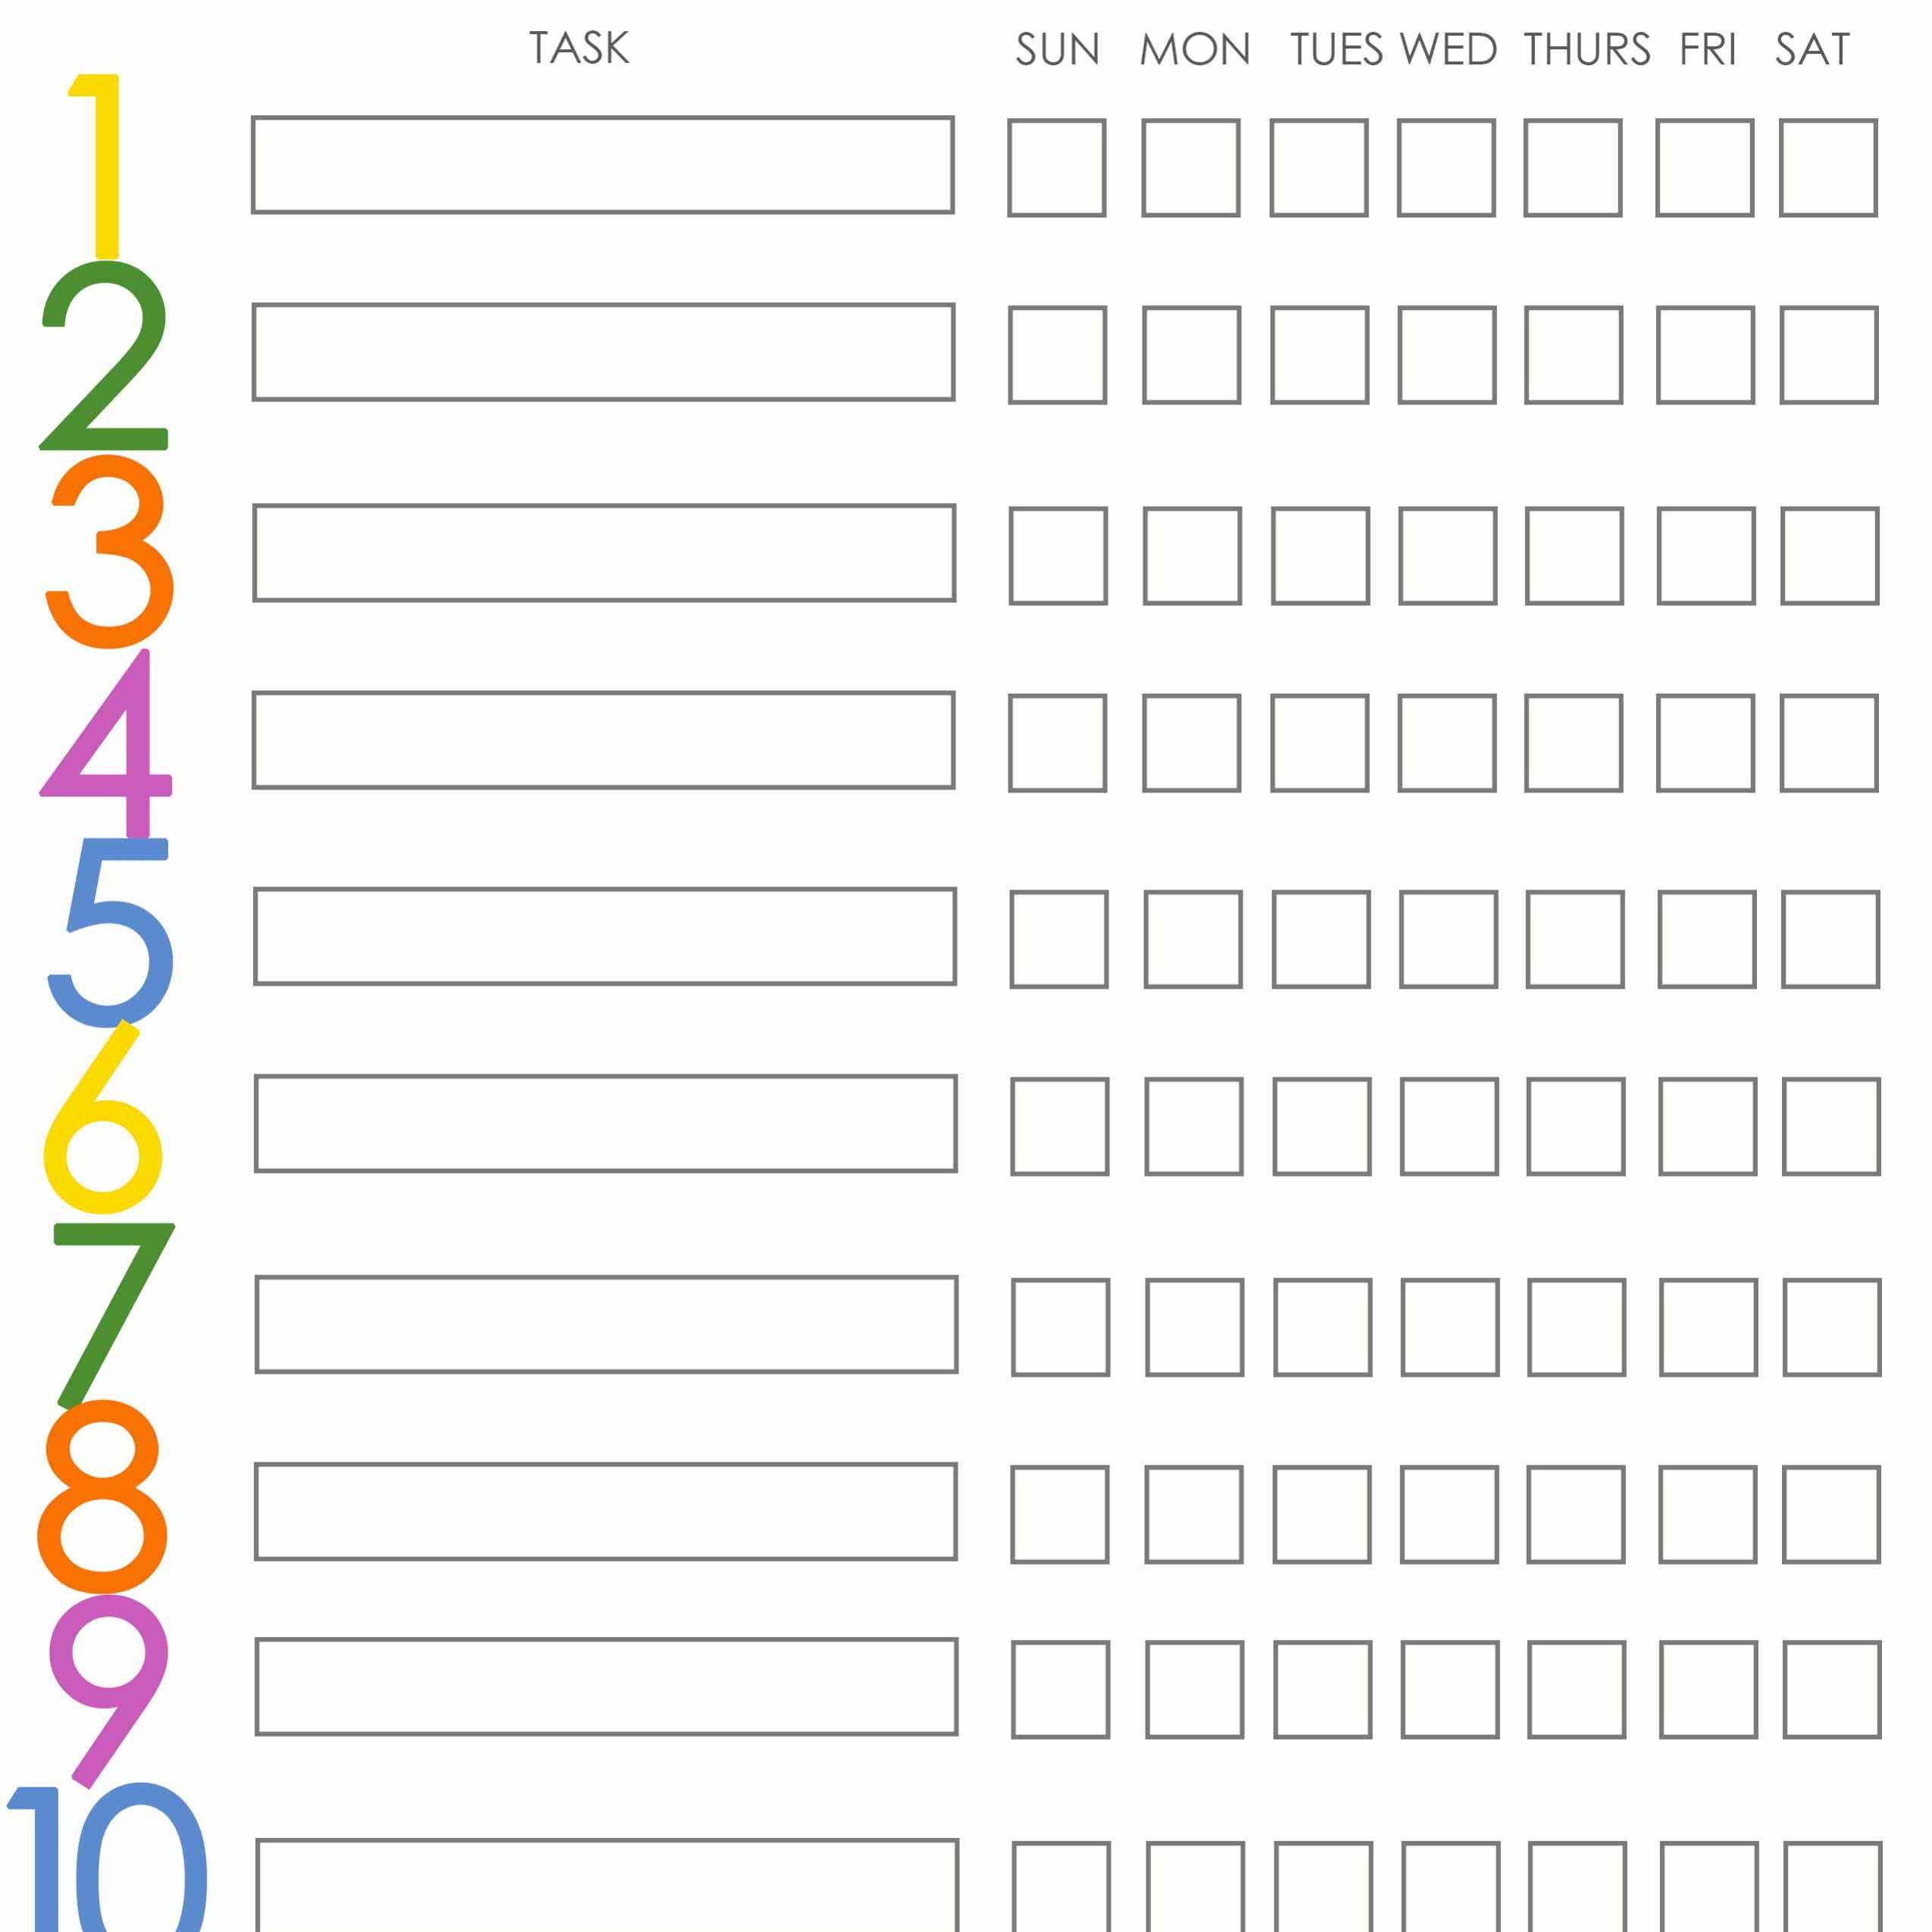 Childrens Chore List Printable - Demir.iso-Consulting.co - Free Printable Chore Charts For Multiple Children